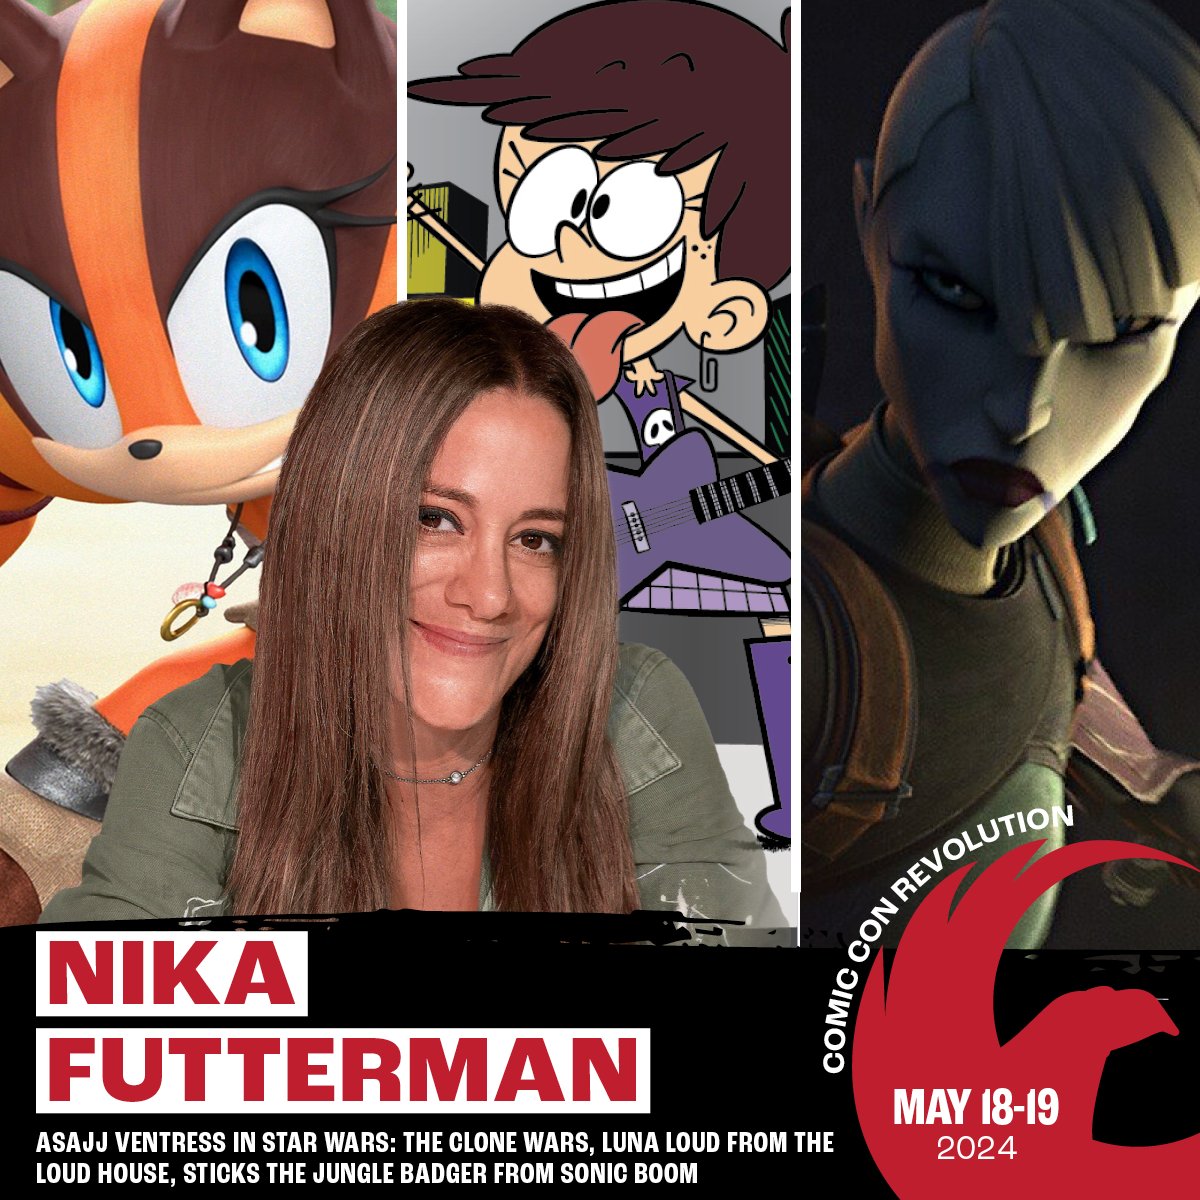 💥 GUEST ALERT! Nika Futterman, the voice of fan favorite #AsajjVentress, is coming to #ComicConRevolution! Also known for her roles as Luna Loud, Sticks the Jungle Badger & more you can meet her all weekend! Tickets: CCRTix.com #comiccon #ontariocalifornia #socal